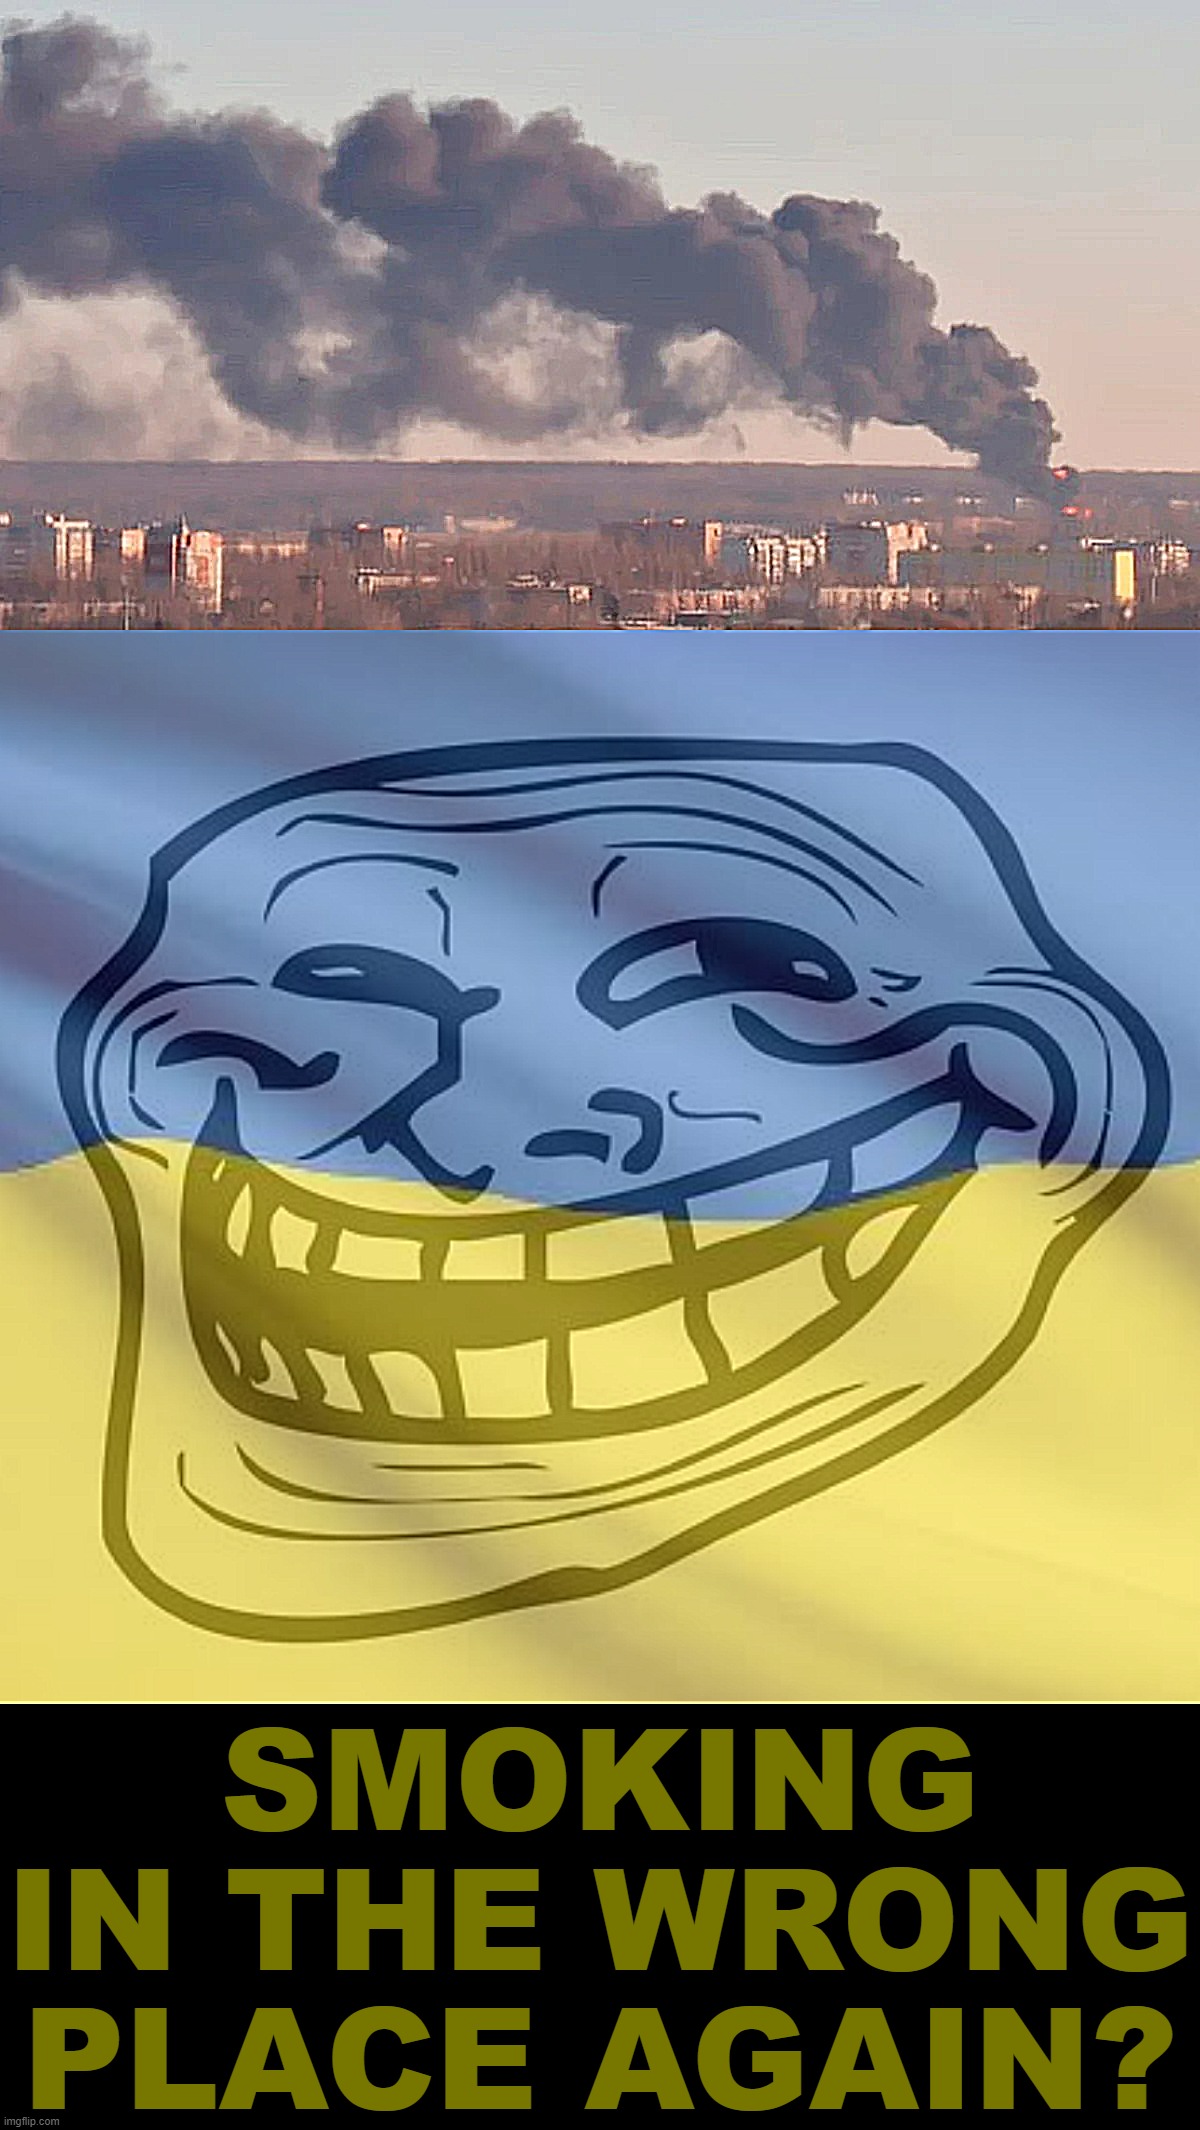 Russia still needs to improve troop discipline, special attention to the "no smoking" policy | SMOKING IN THE WRONG PLACE AGAIN? | image tagged in ukrainian missile strike in russia,ukrainian trollface | made w/ Imgflip meme maker